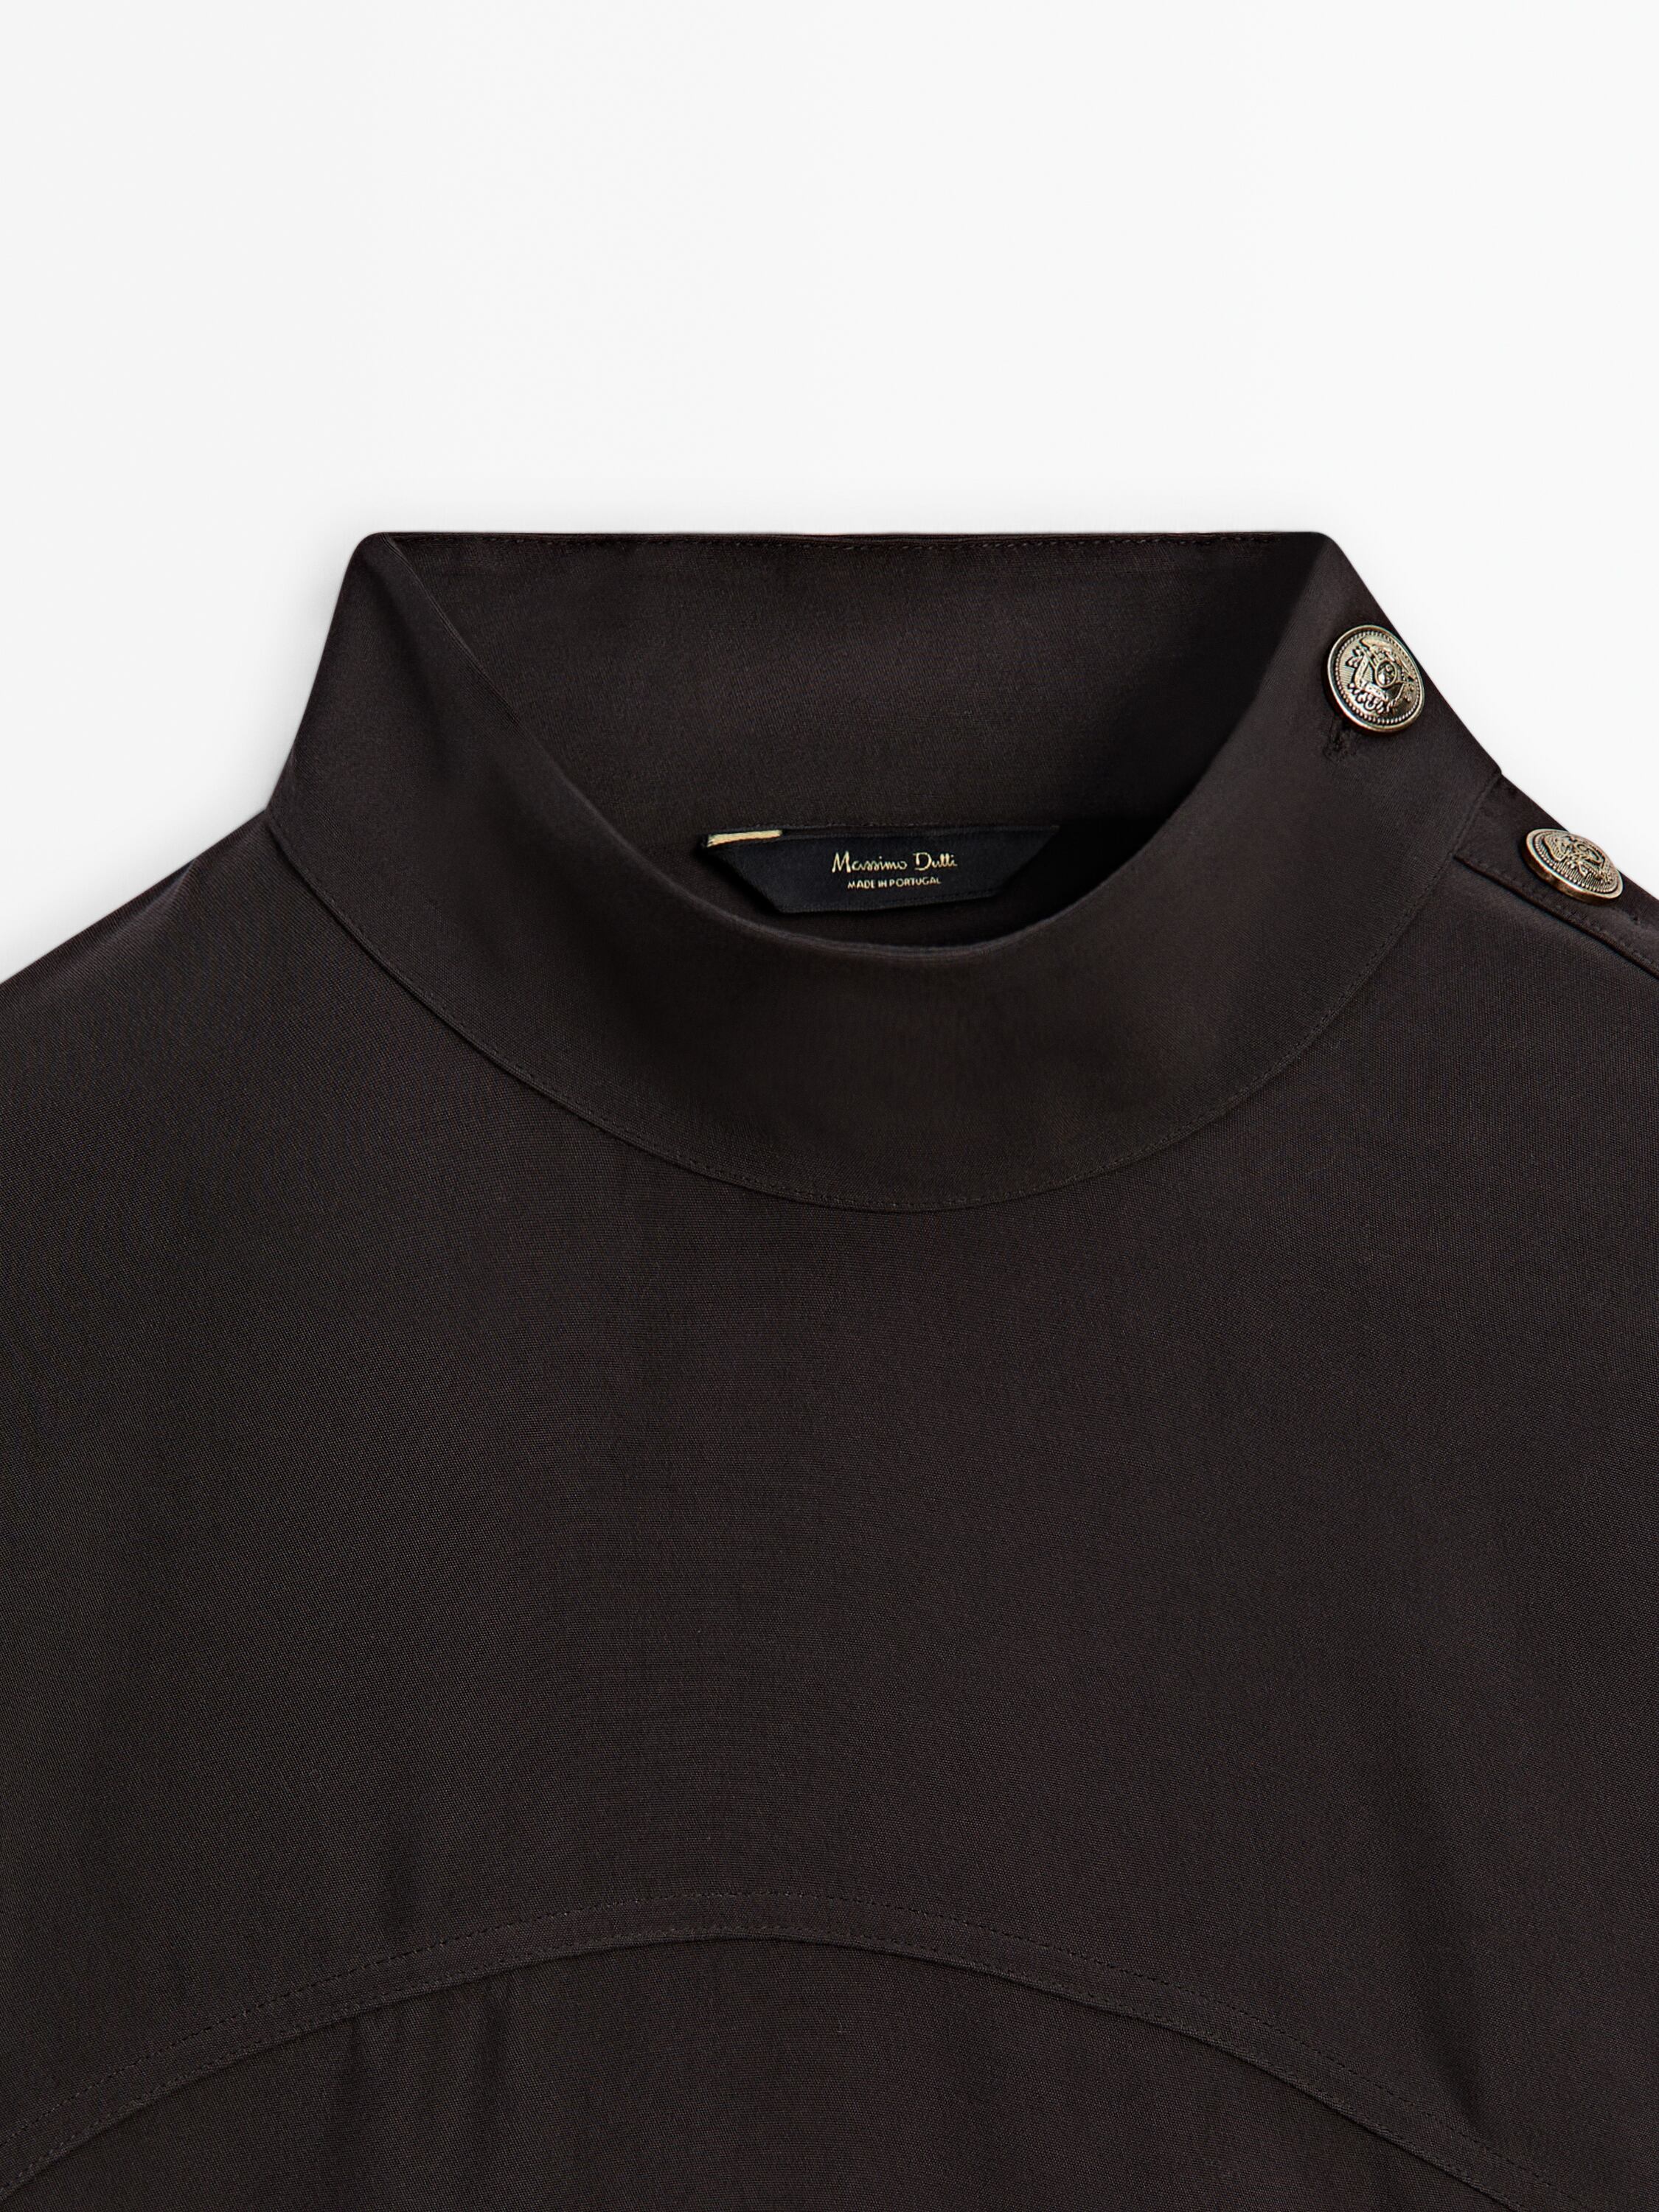 Black blouse with gold buttons